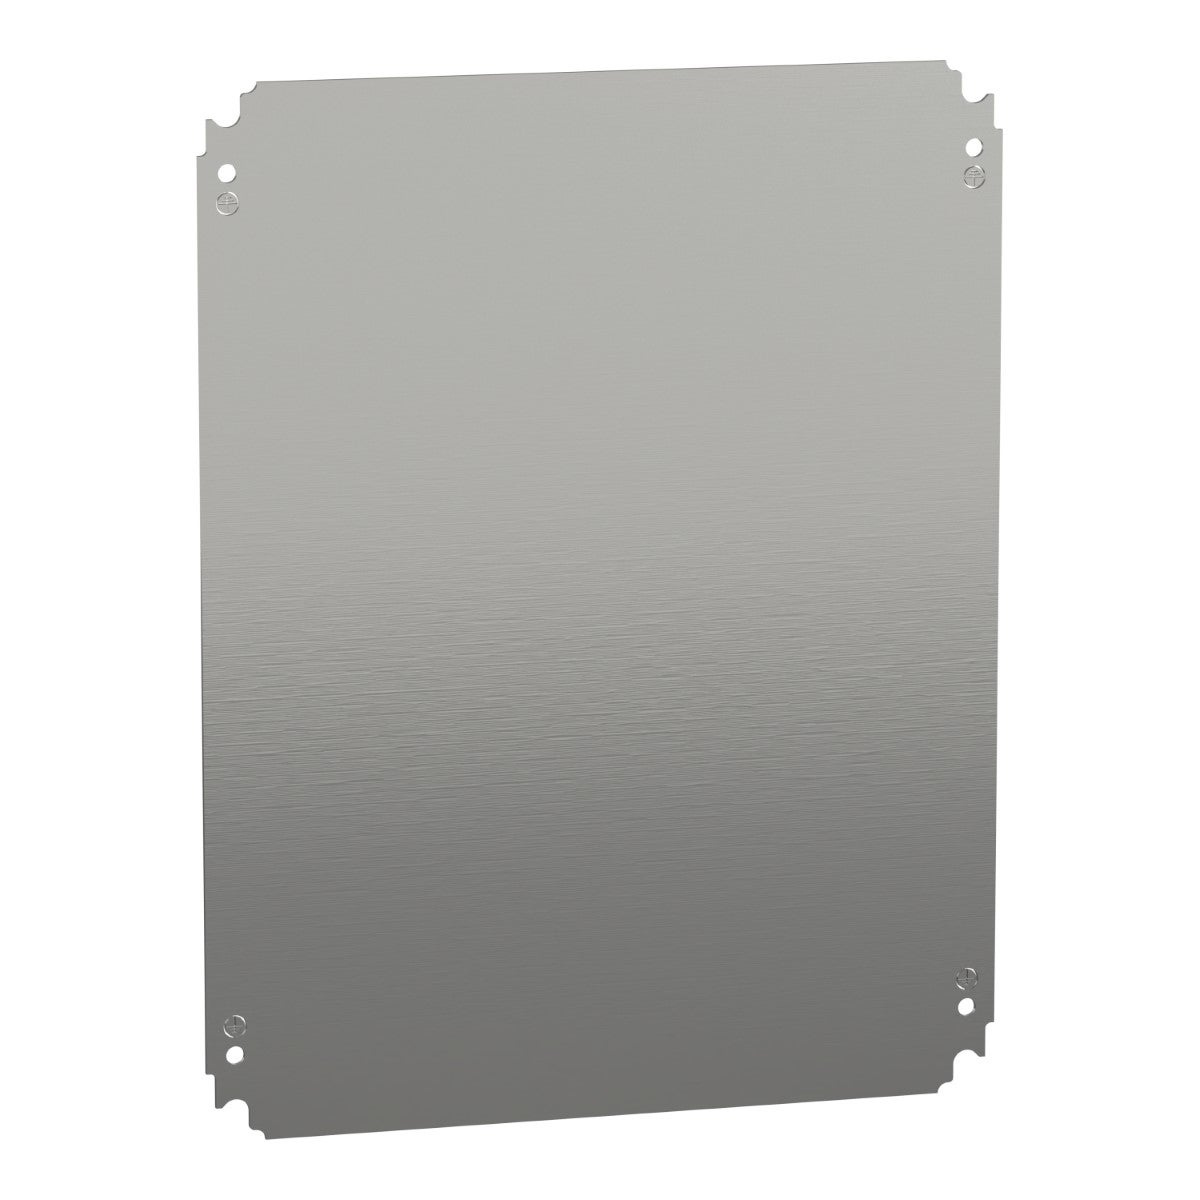 Plain mounting plate H500xW400mm made of galvanised sheet steel